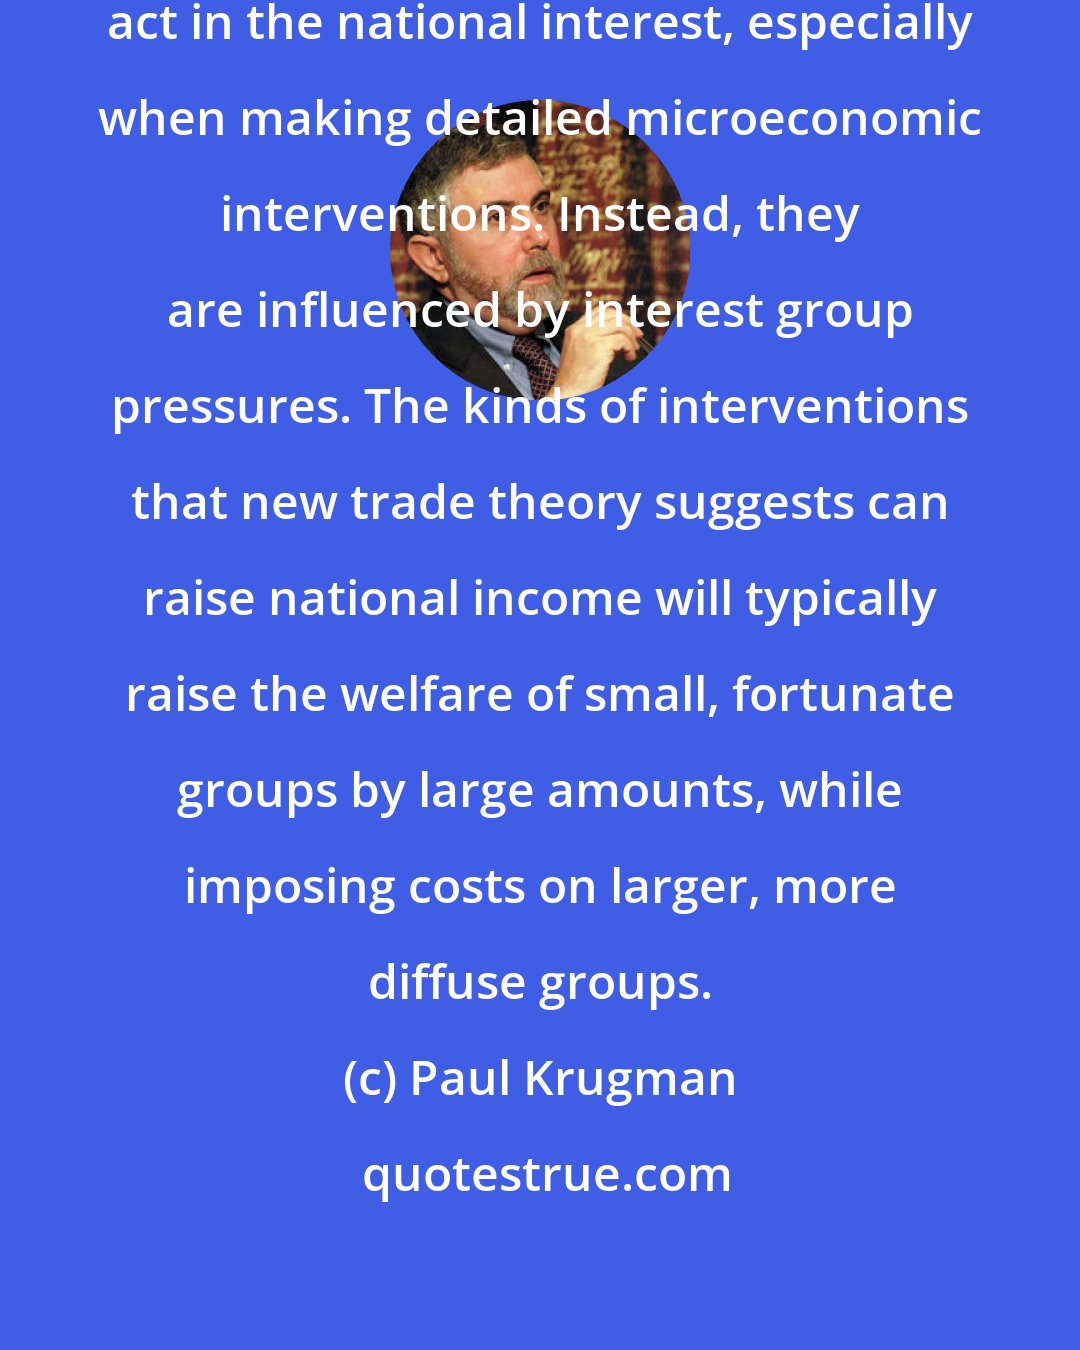 Paul Krugman: Governments do not necessarily act in the national interest, especially when making detailed microeconomic interventions. Instead, they are influenced by interest group pressures. The kinds of interventions that new trade theory suggests can raise national income will typically raise the welfare of small, fortunate groups by large amounts, while imposing costs on larger, more diffuse groups.